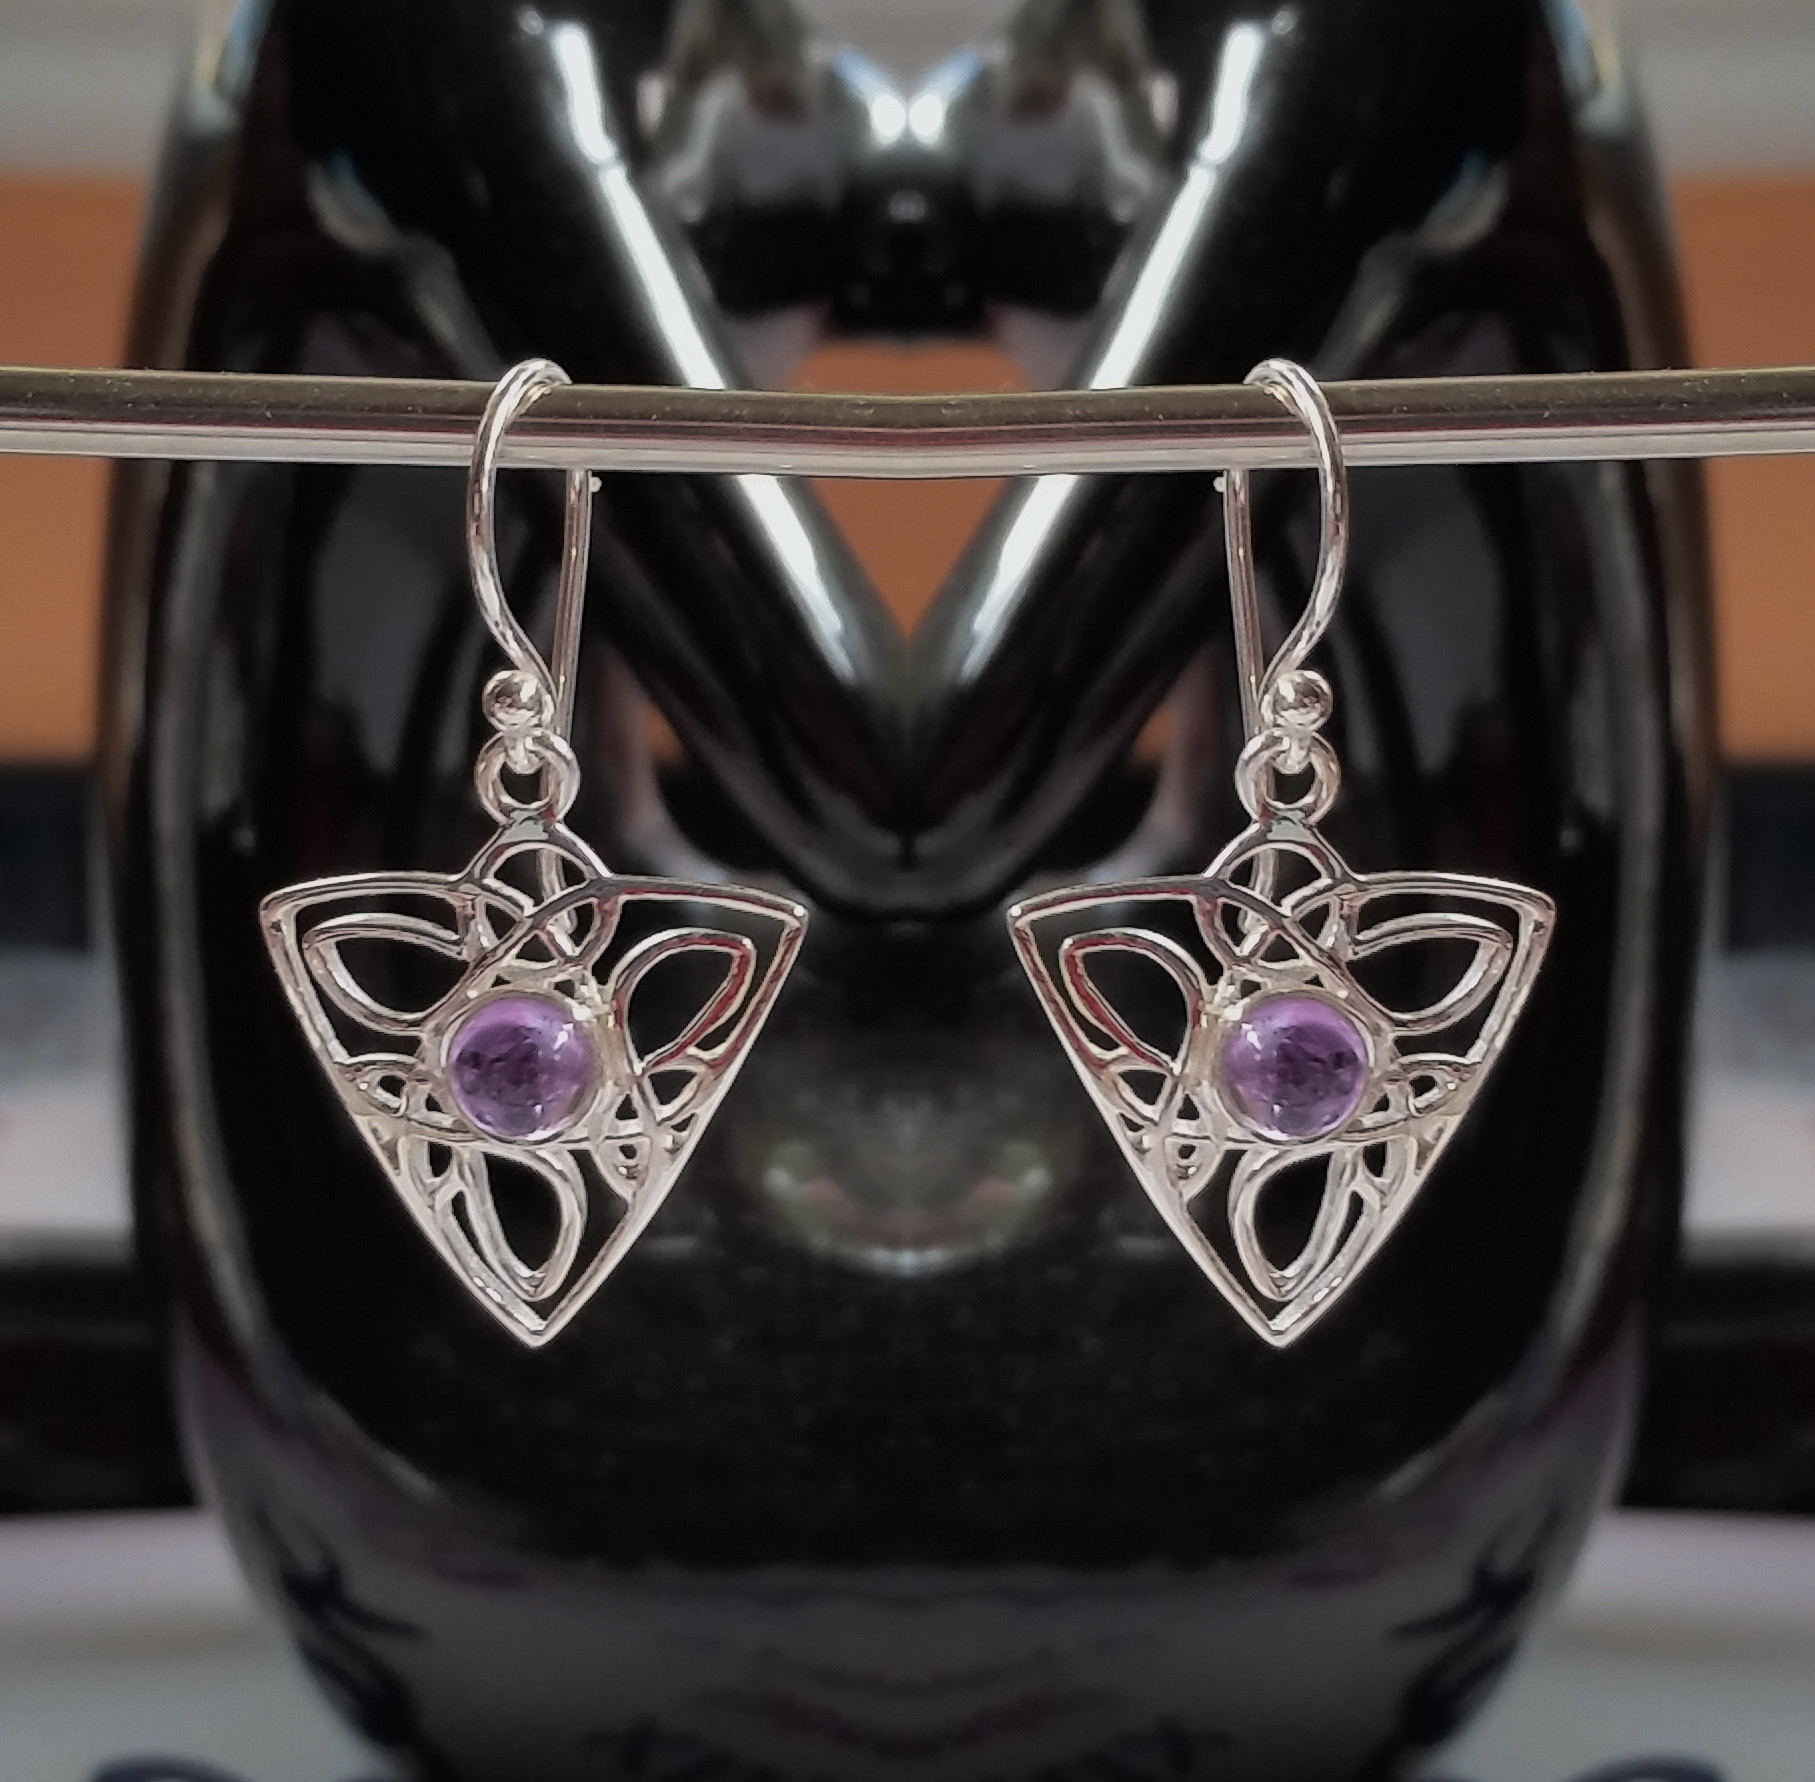 Celtic triangle knot design with central 6mm gemstone